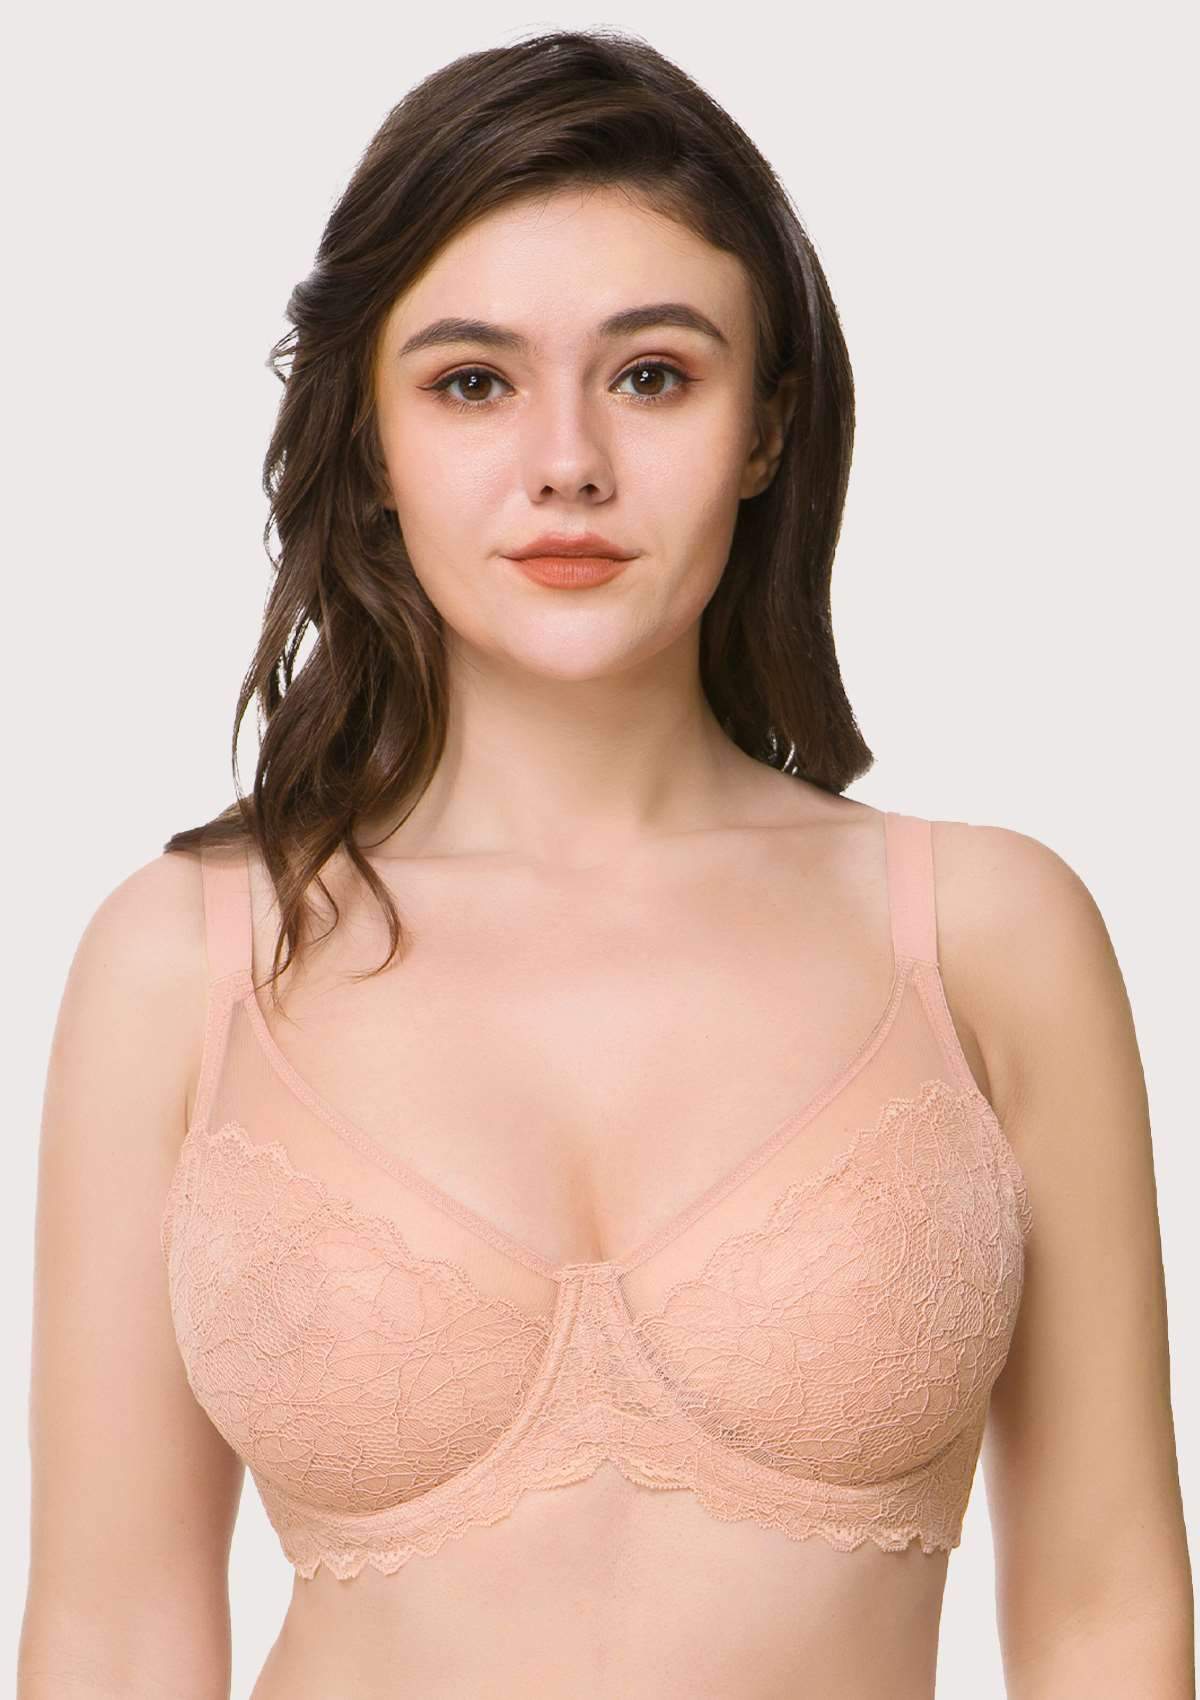 HSIA Wisteria Bra For Lift And Support - Full Coverage Minimizer Bra - Light Pink / 34 / DDD/F